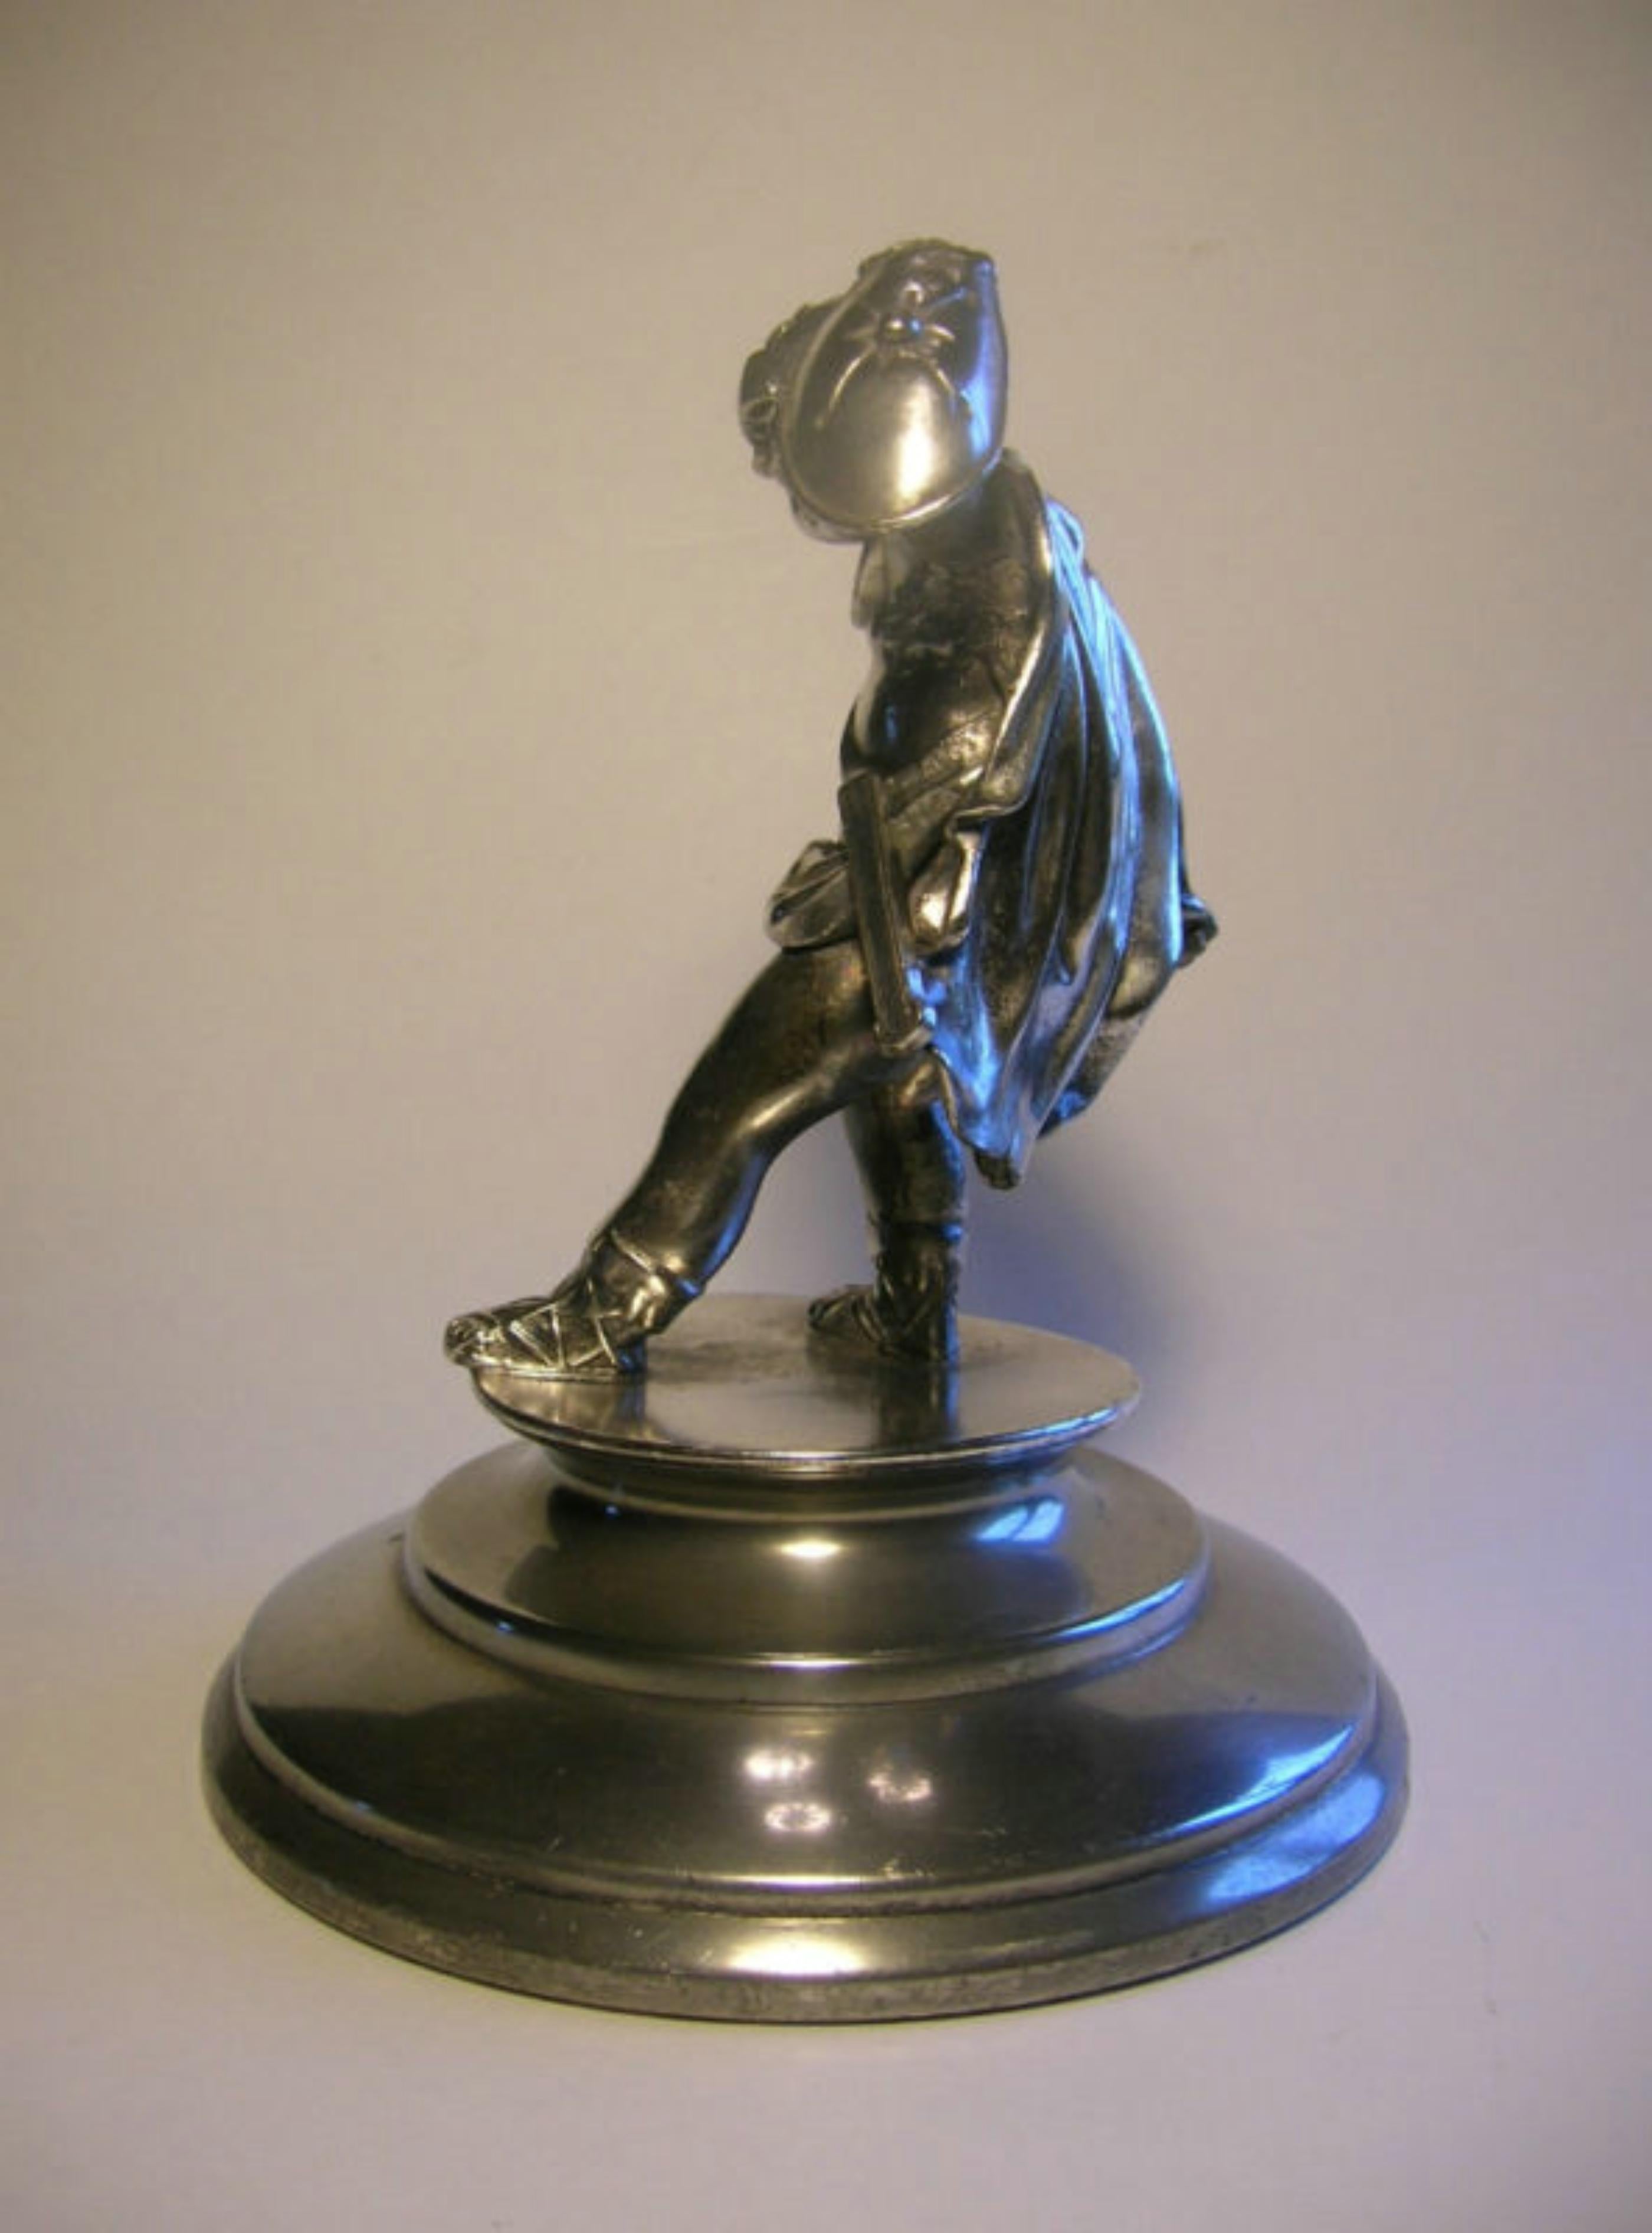 American MIDDLETOWN PLATE CO. - Antique Neoclassical Warrior Statue - U.S. - Late 19th C. For Sale